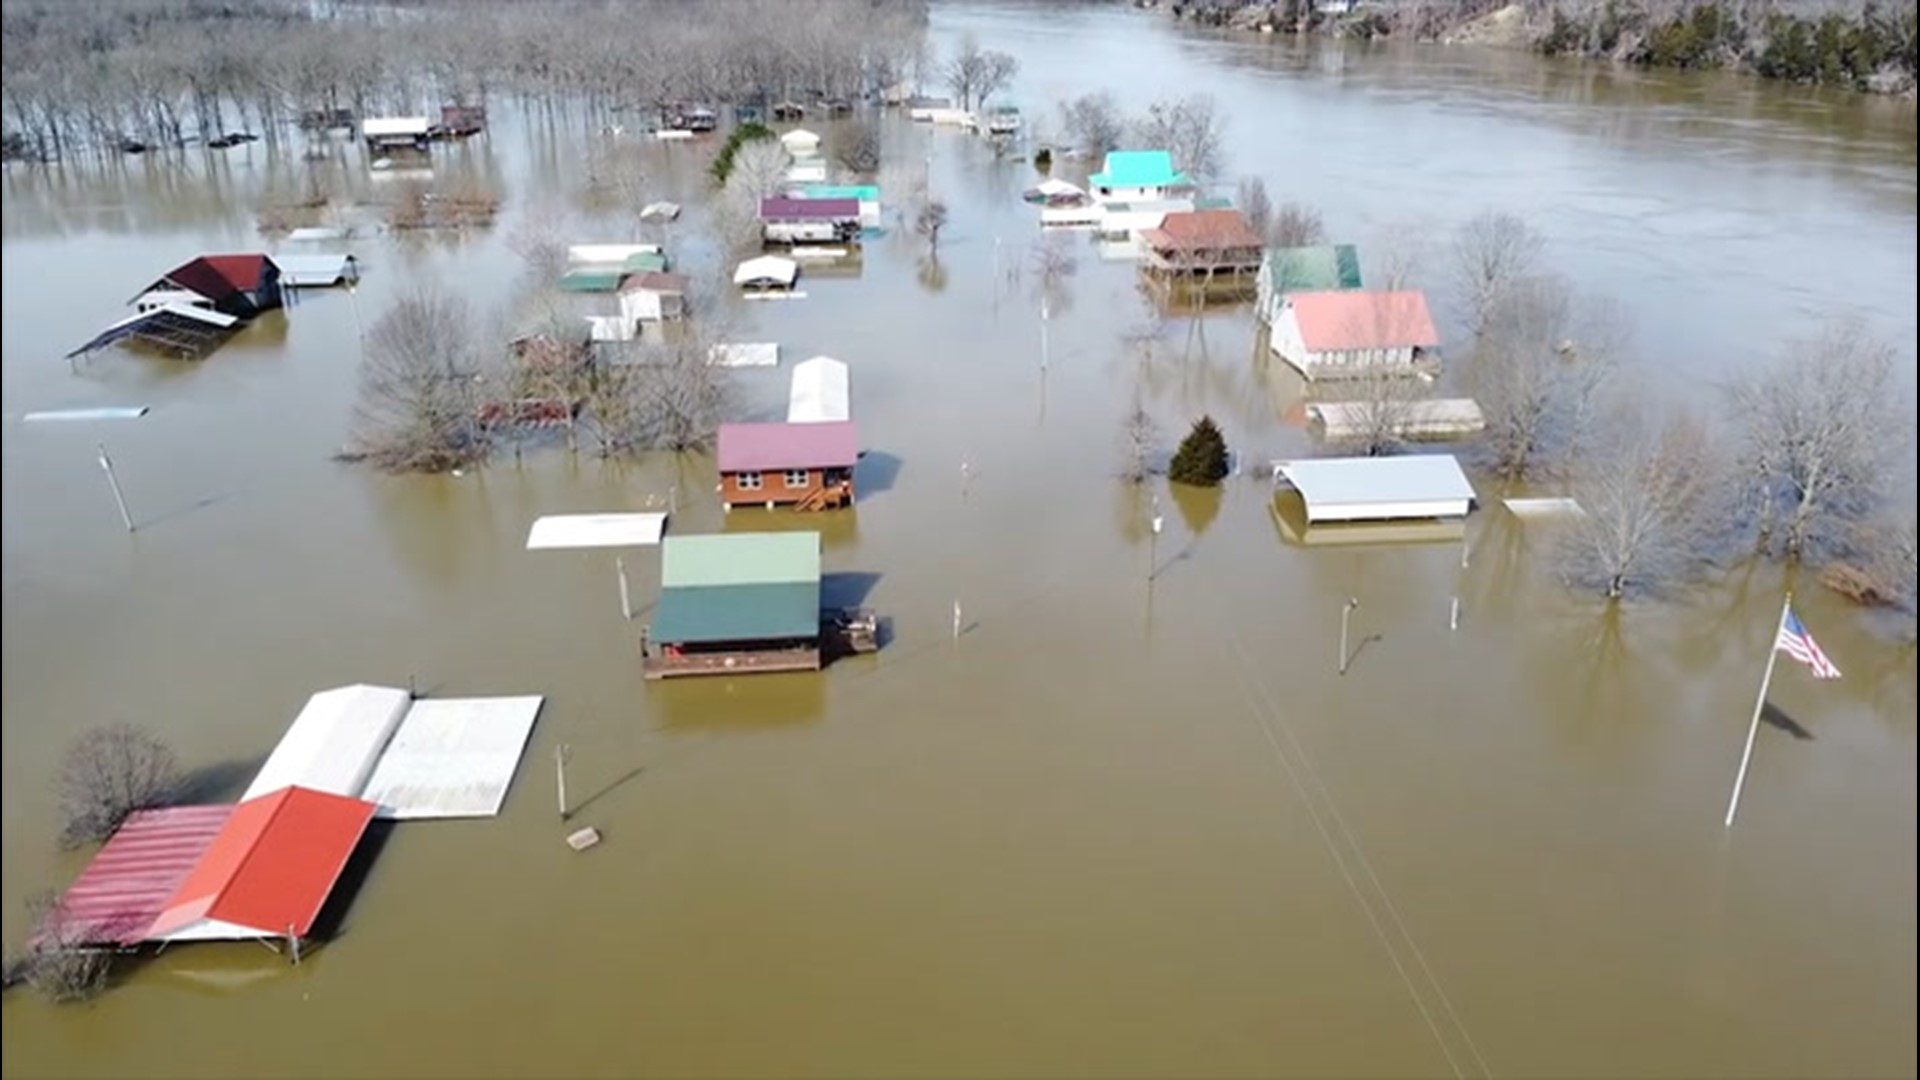 Video posted on Feb. 16 shows lines of homes swamped by floodwaters. Aerial video was recorded in Hardin County, Tennessee.